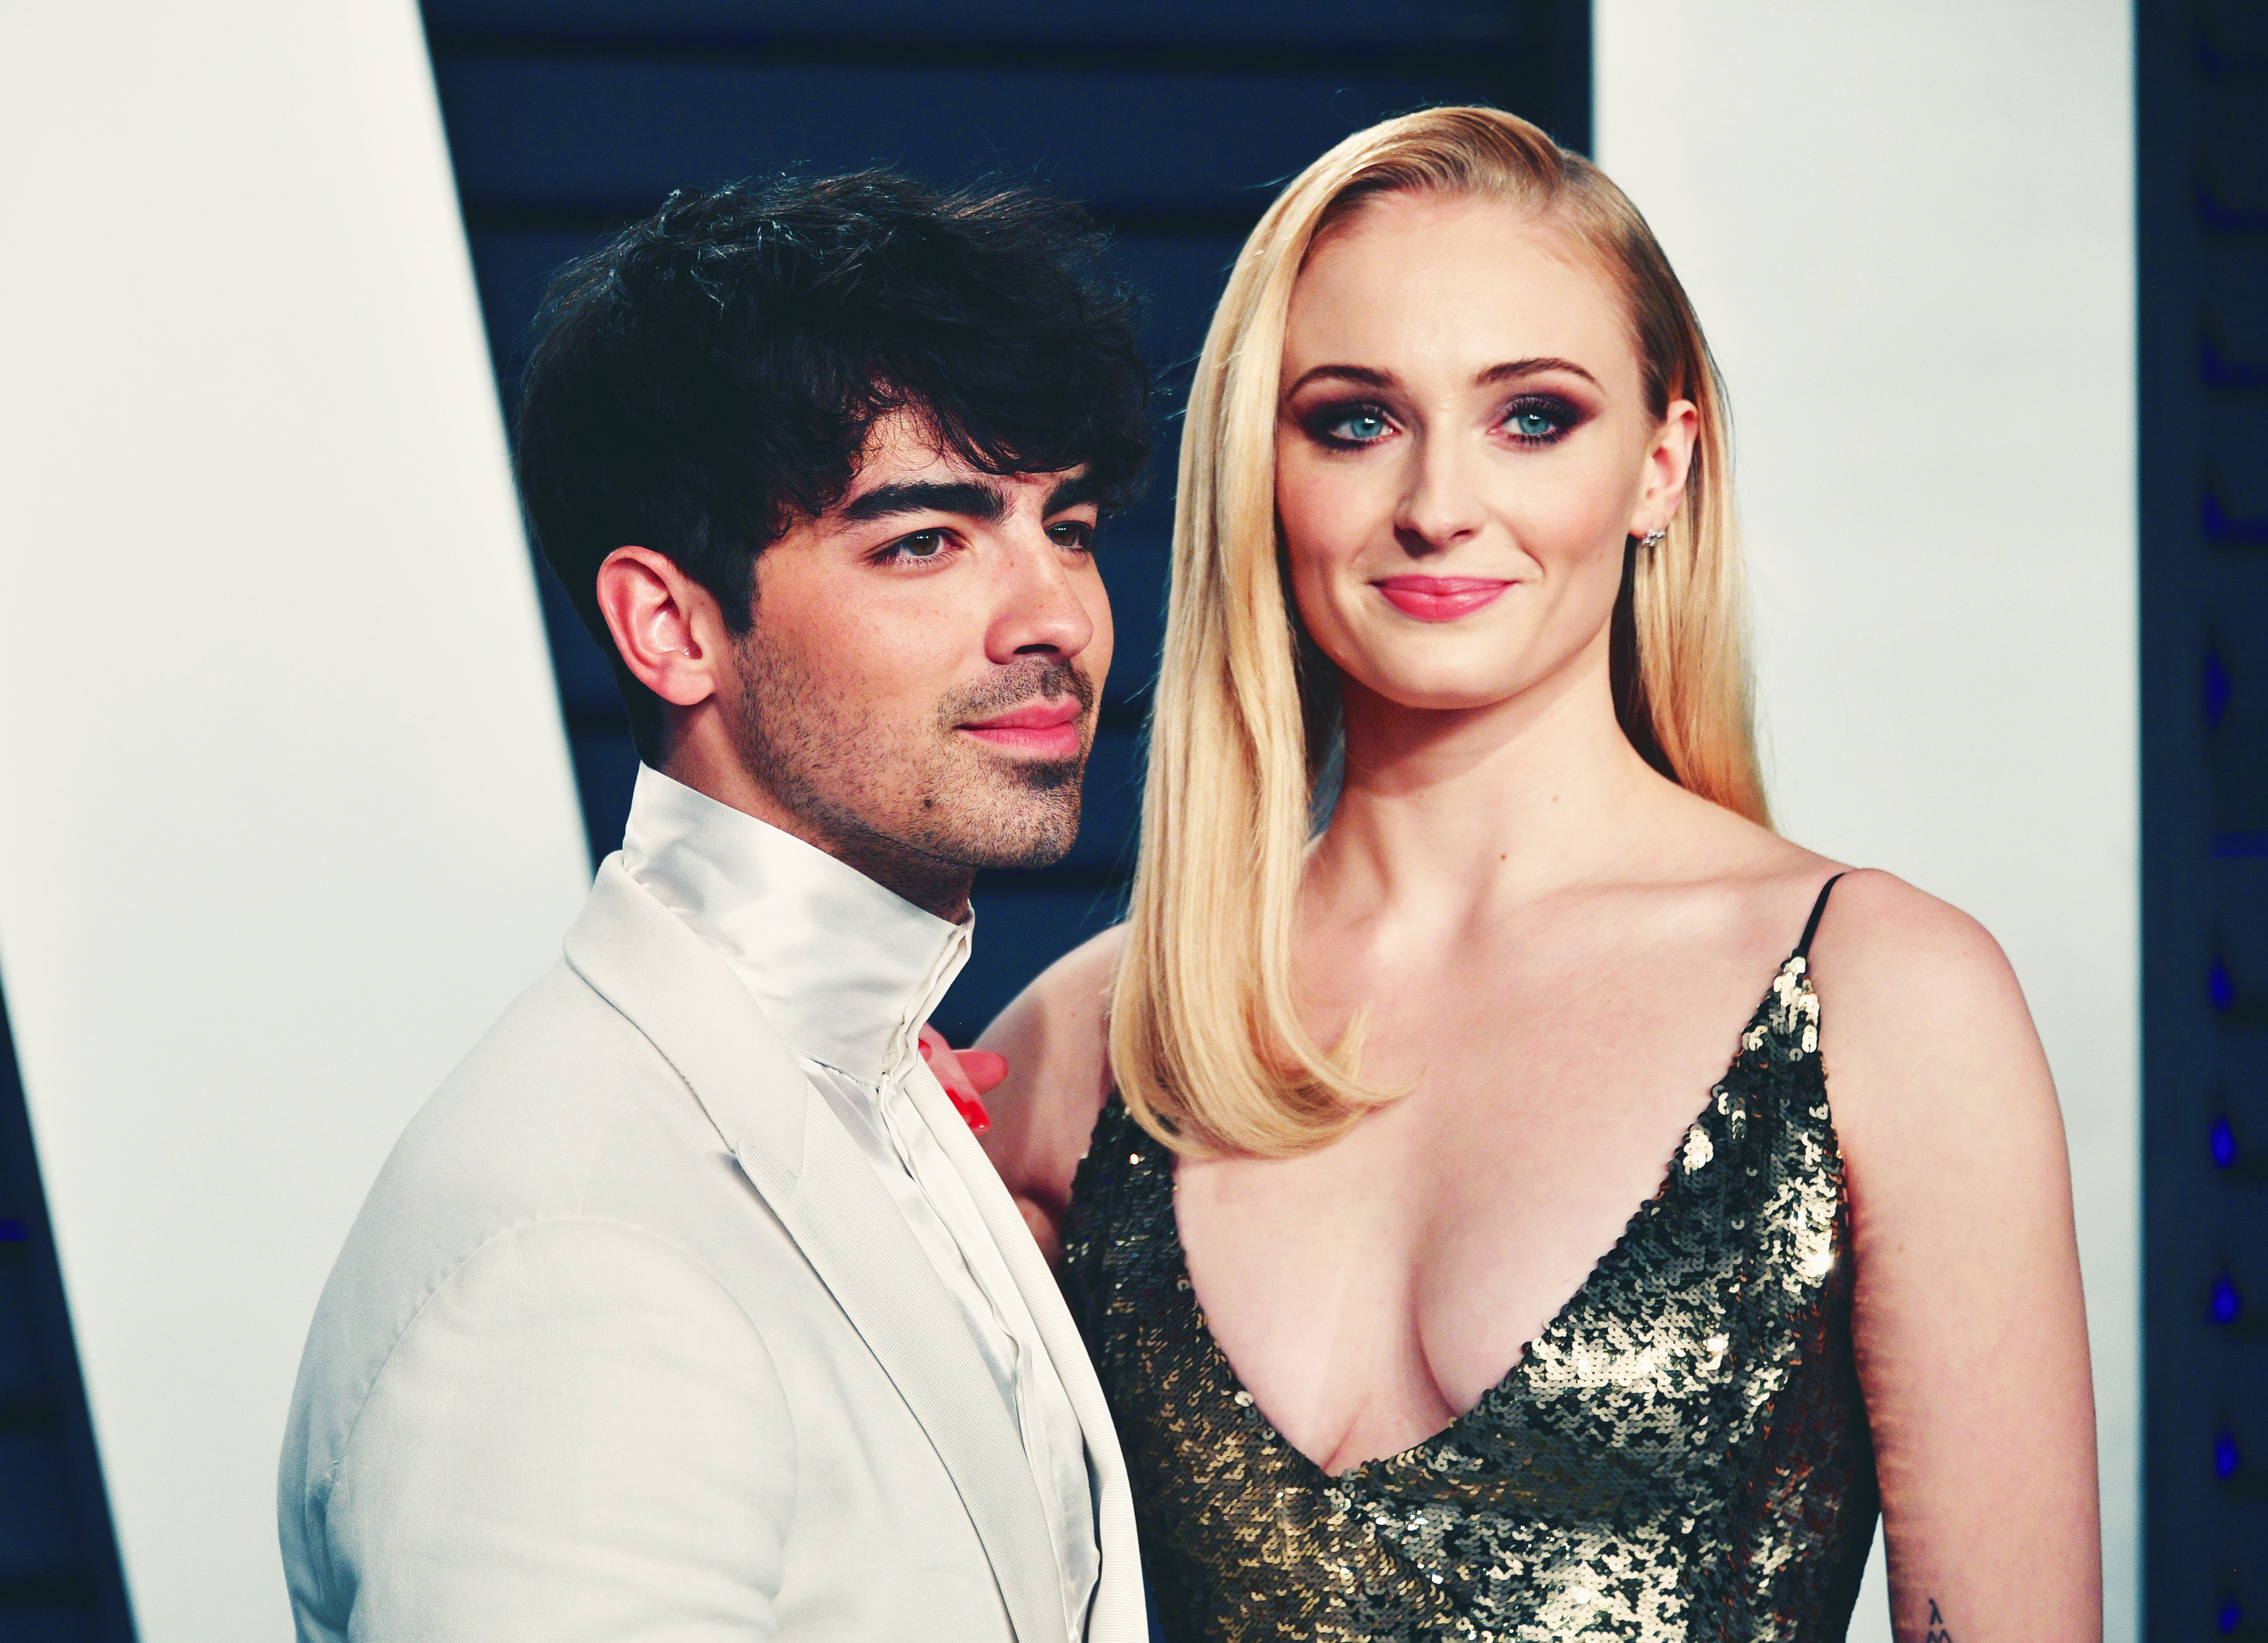 July 27, 2020: SOPHIE TURNER has revealed she is 'delighted' after  welcoming her first child with husband JOE JONAS. The Game of Thrones star,  24, gave birth last Wednesday at a hospital